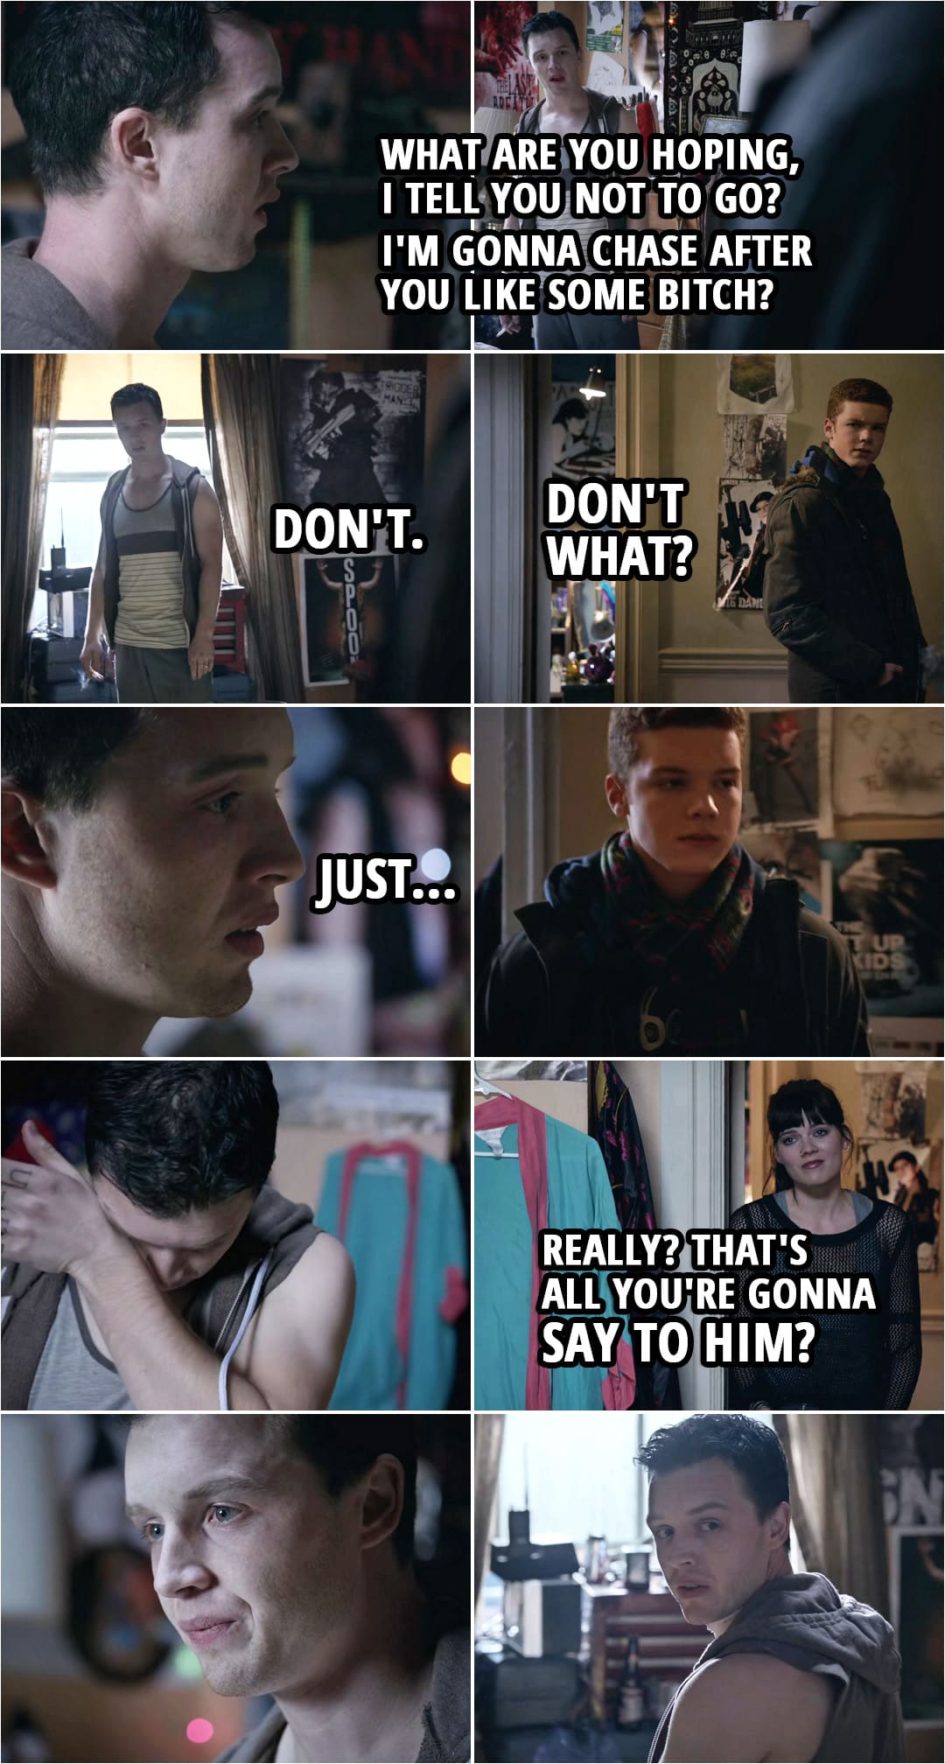 Quote from Shameless 3x12 | (Ian tells Mickey he's joining the army and will be gonne for at least four years...) Mickey Milkovich: What are you hoping, I tell you not to go? I'm gonna chase after you like some b*tch? Ian Gallagher: I didn't come here for you. Mickey Milkovich: Don't. Ian Gallagher: Don't what? Mickey Milkovich: Just... (Ian leaves, Mickey is tearing up, Mandy peaks into Mickey's room...) Mickey Milkovich: What the f**k do you want? Mandy Milkovich: Really? That's all you're gonna say to him? You're a f**king pussy.